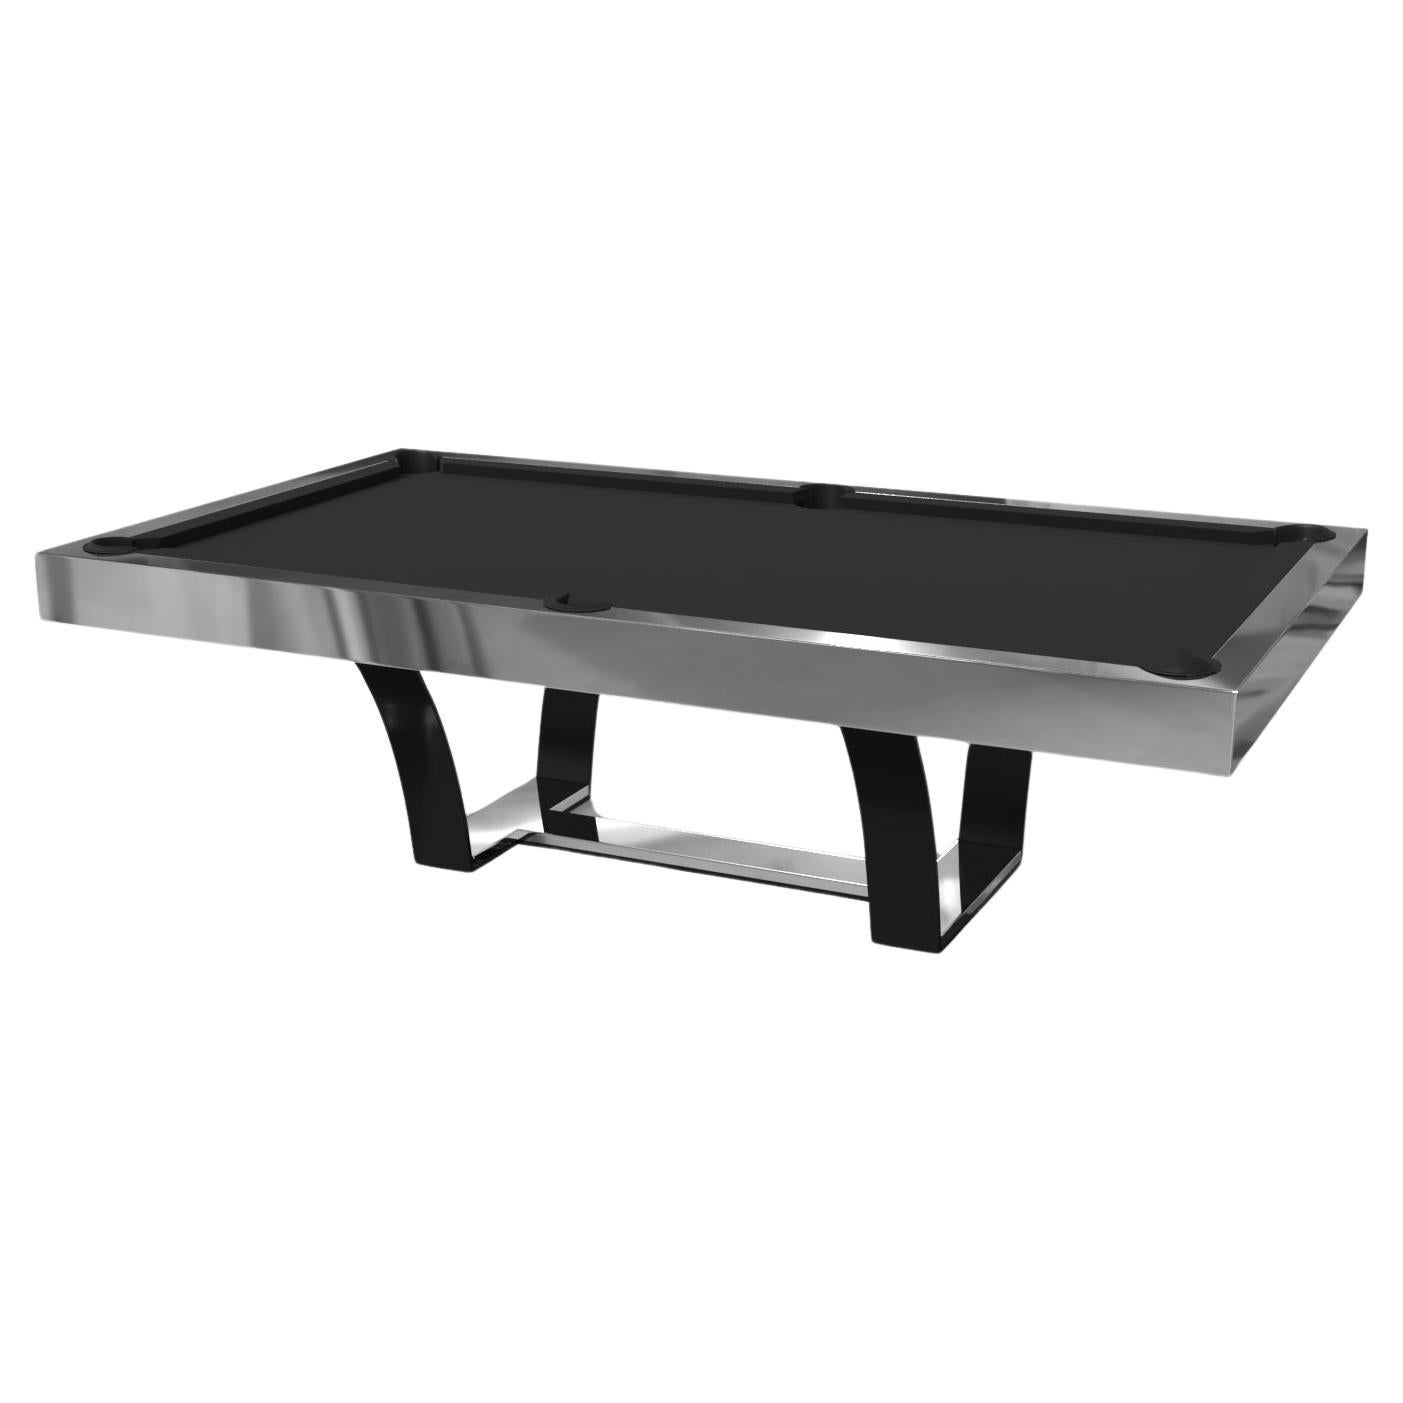 Elevate Customs Elite Pool Table / Solid Stainless Steel in 7'/8' - Made in USA For Sale